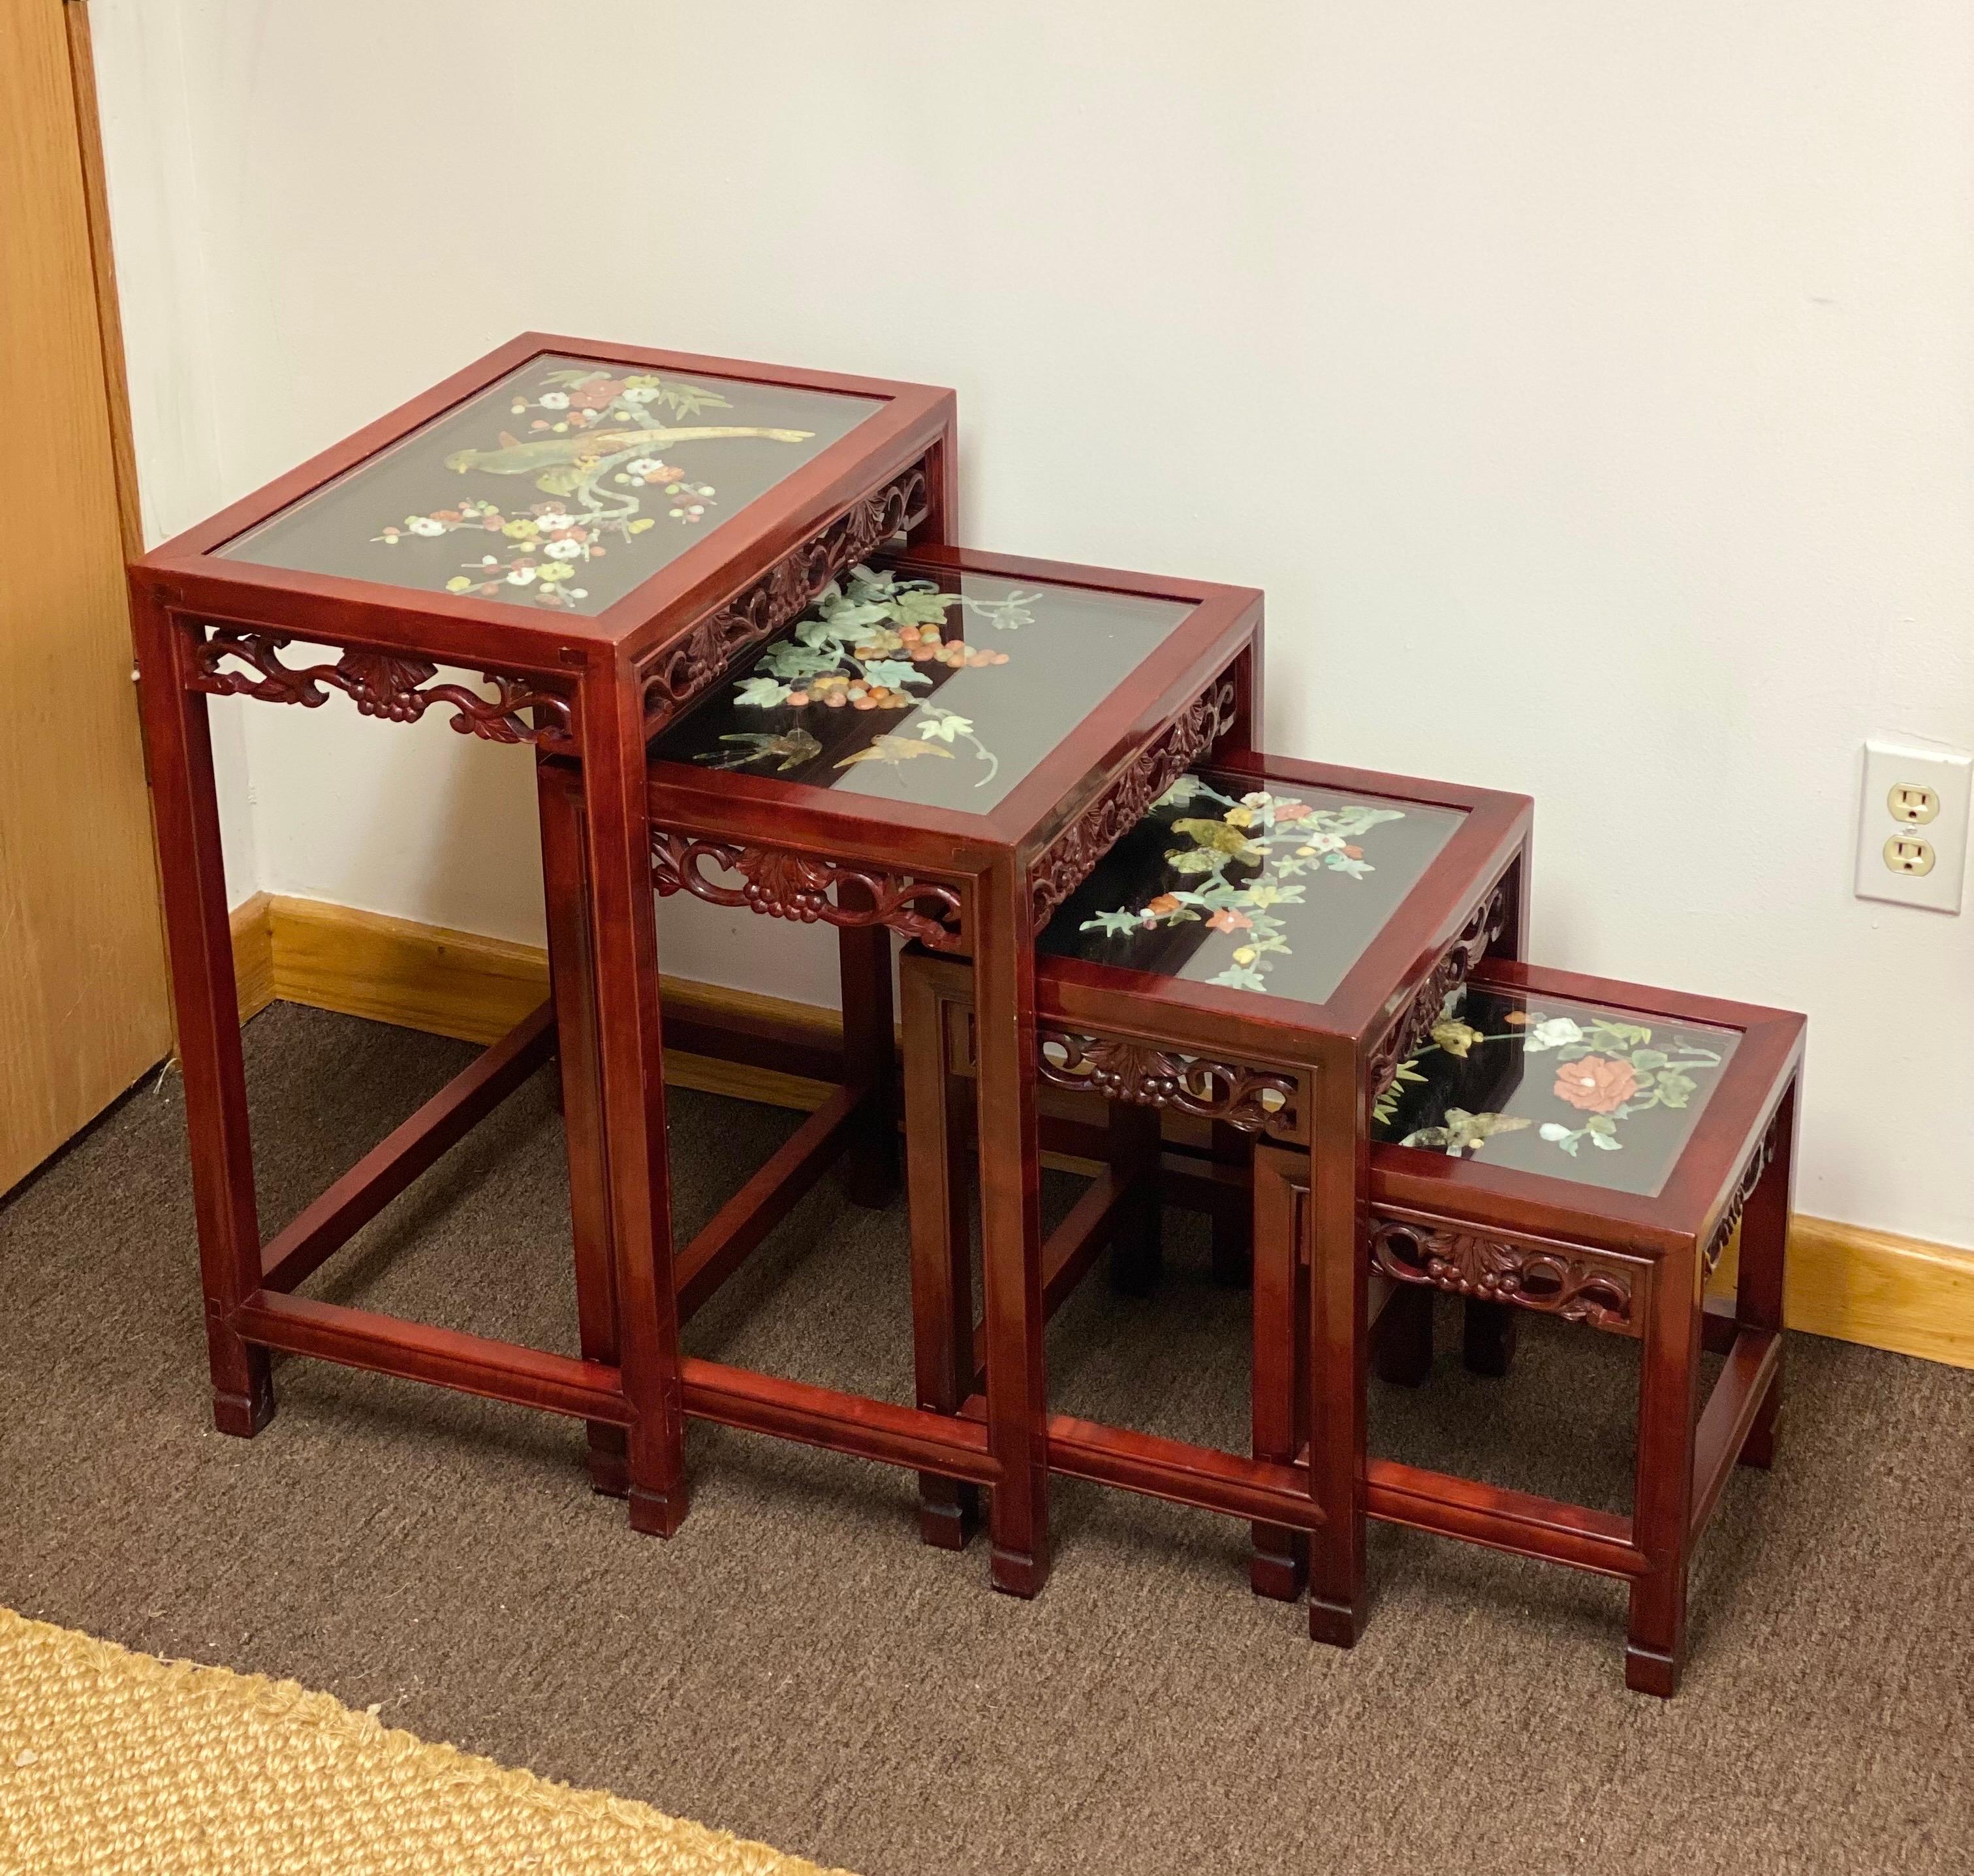 We are very pleased to offer a rare, stunning set of Chinoiserie nesting tables, circa the 1920s. This set of four nesting side tables is the perfect accompaniment to any space. Constructed from beautiful rosewood, they showcase magnificent Jade